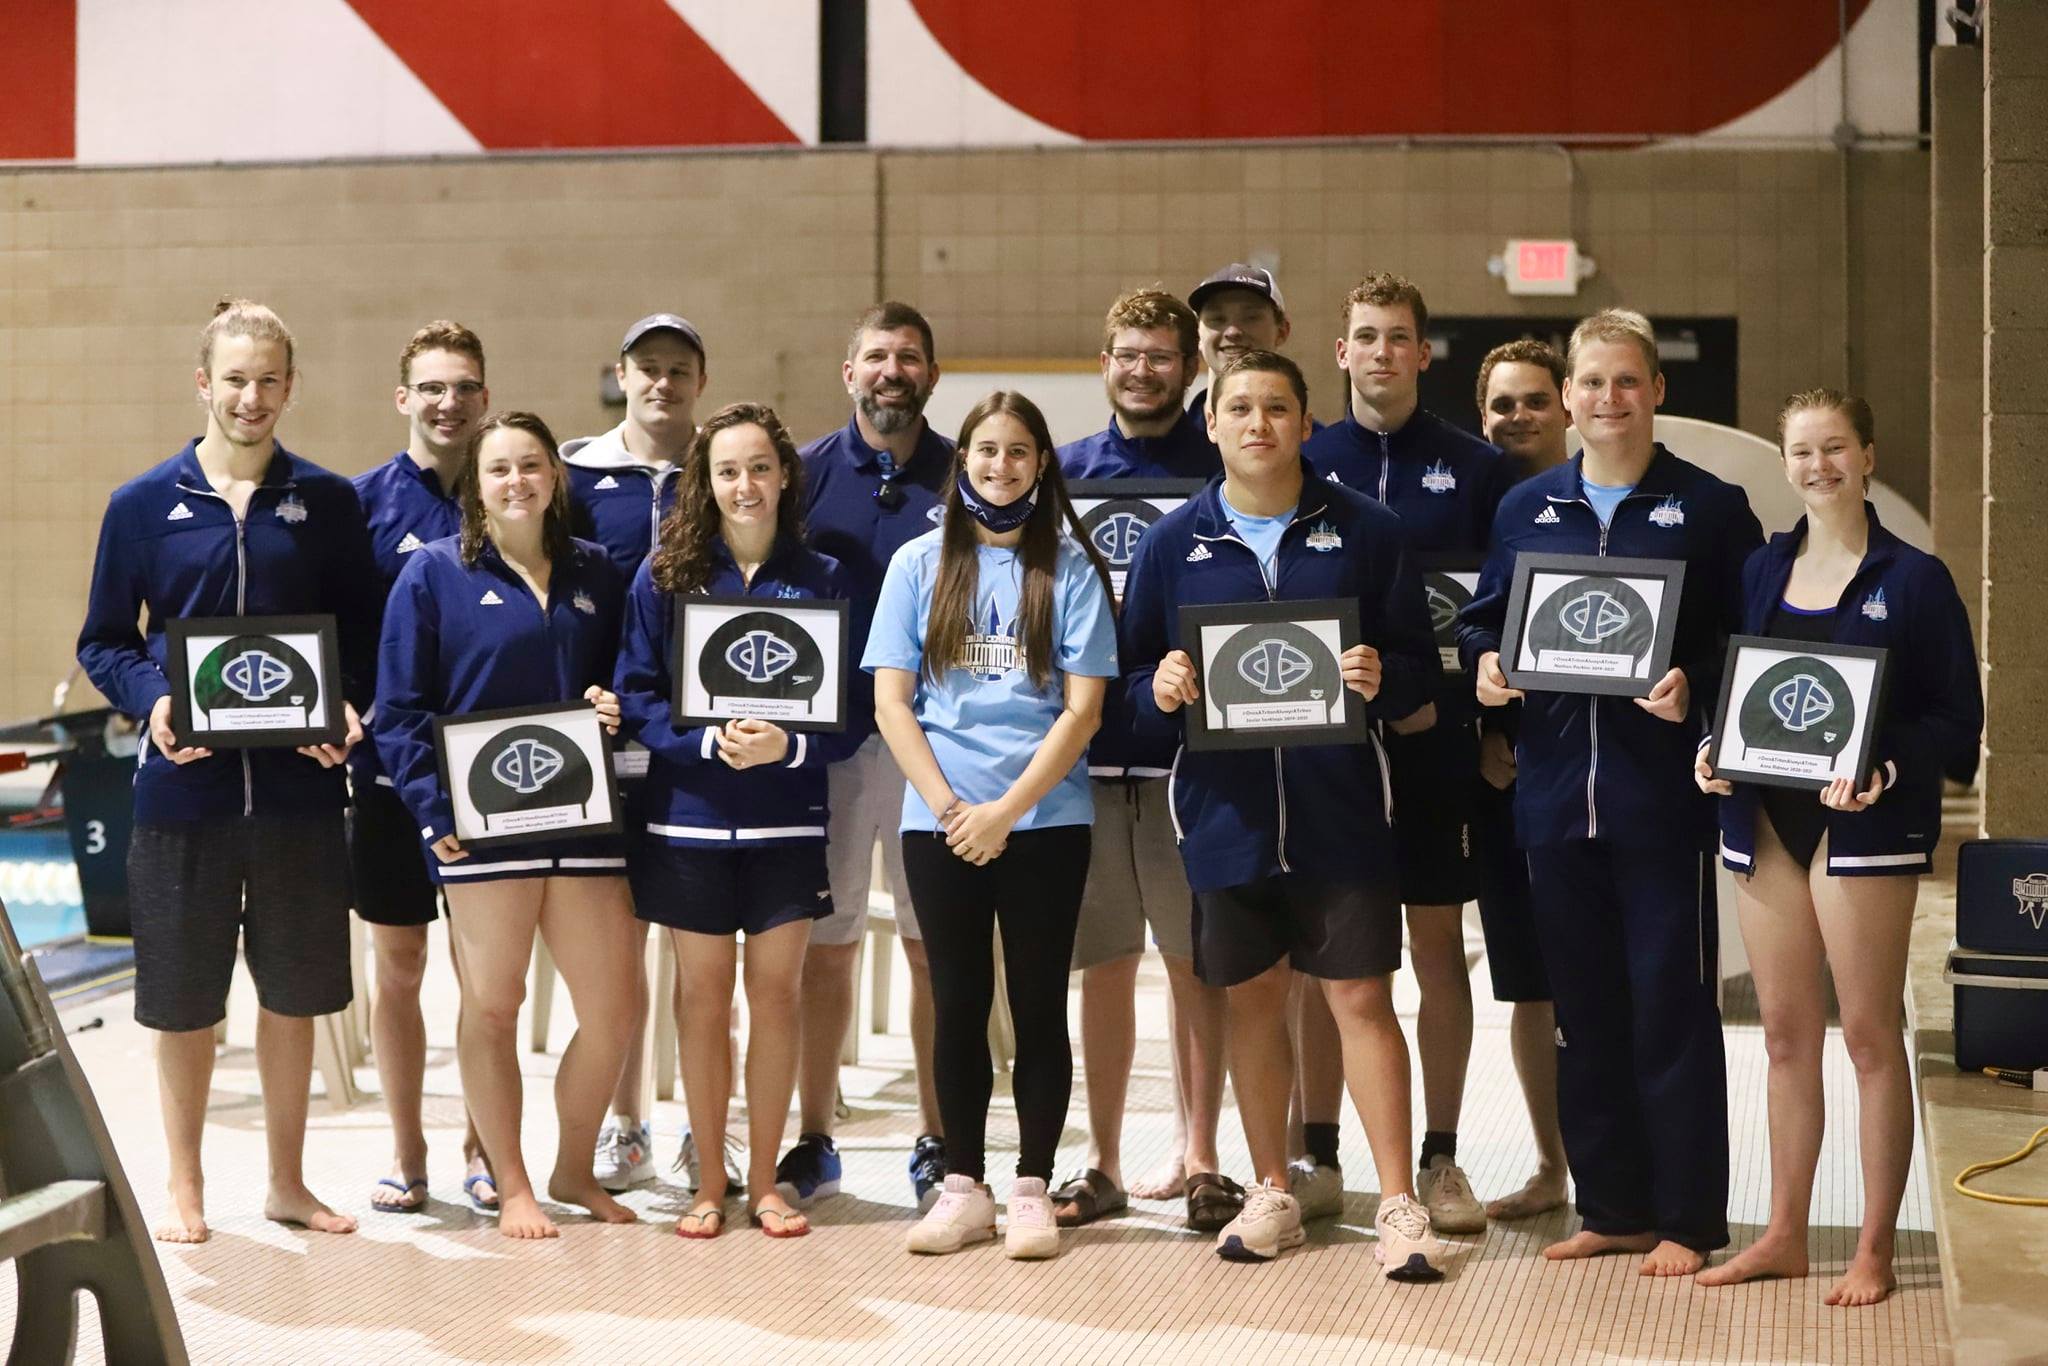 Tritons provide sophomores with special night